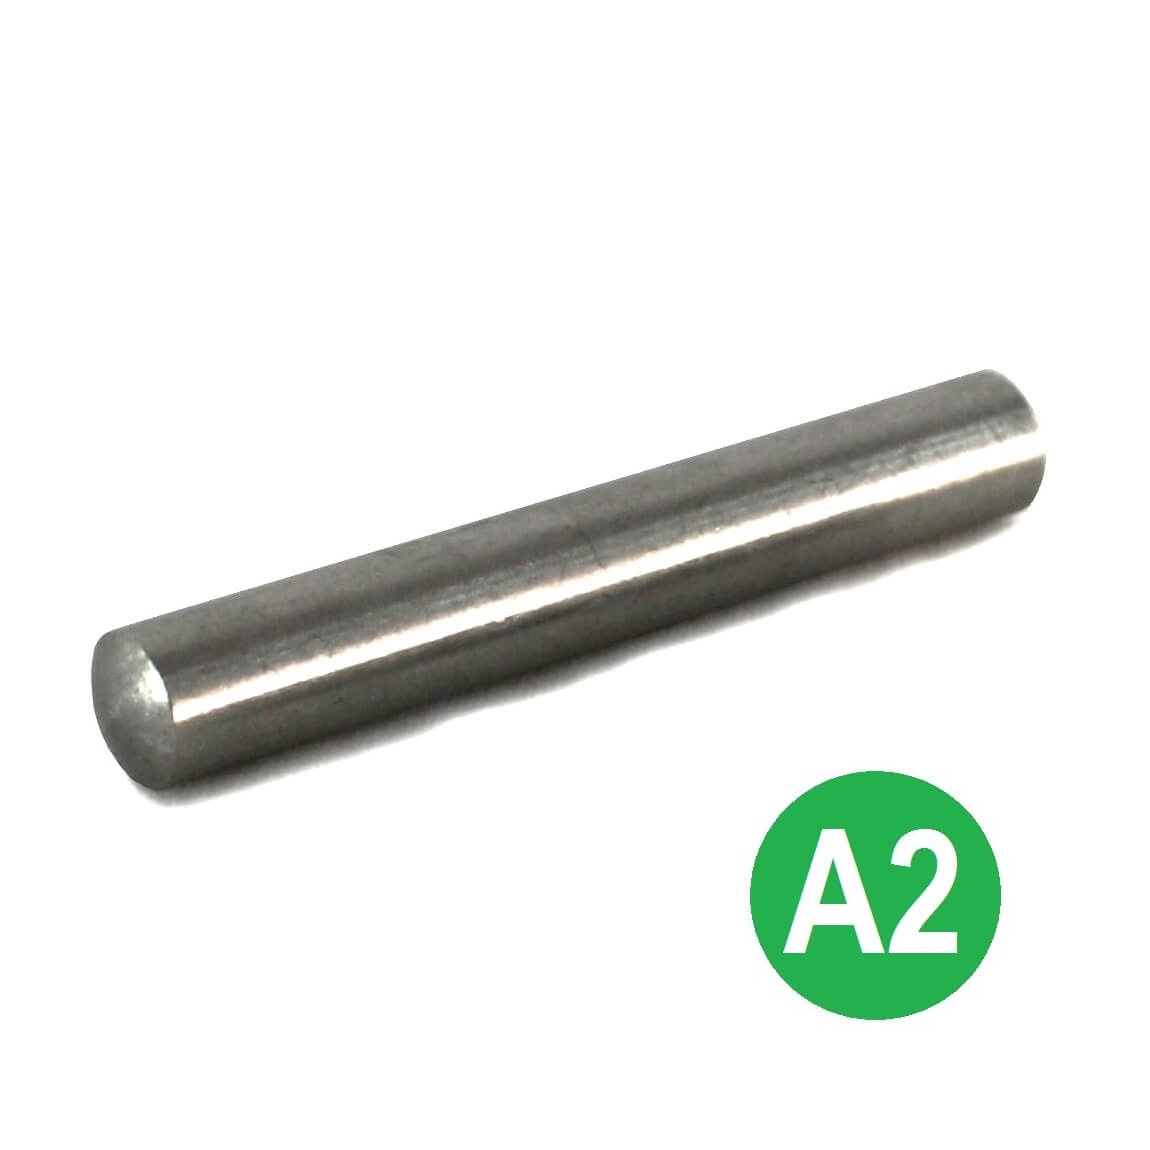 2mm Dia x 8mm A2 Stainless Dowel Pins DIN 7